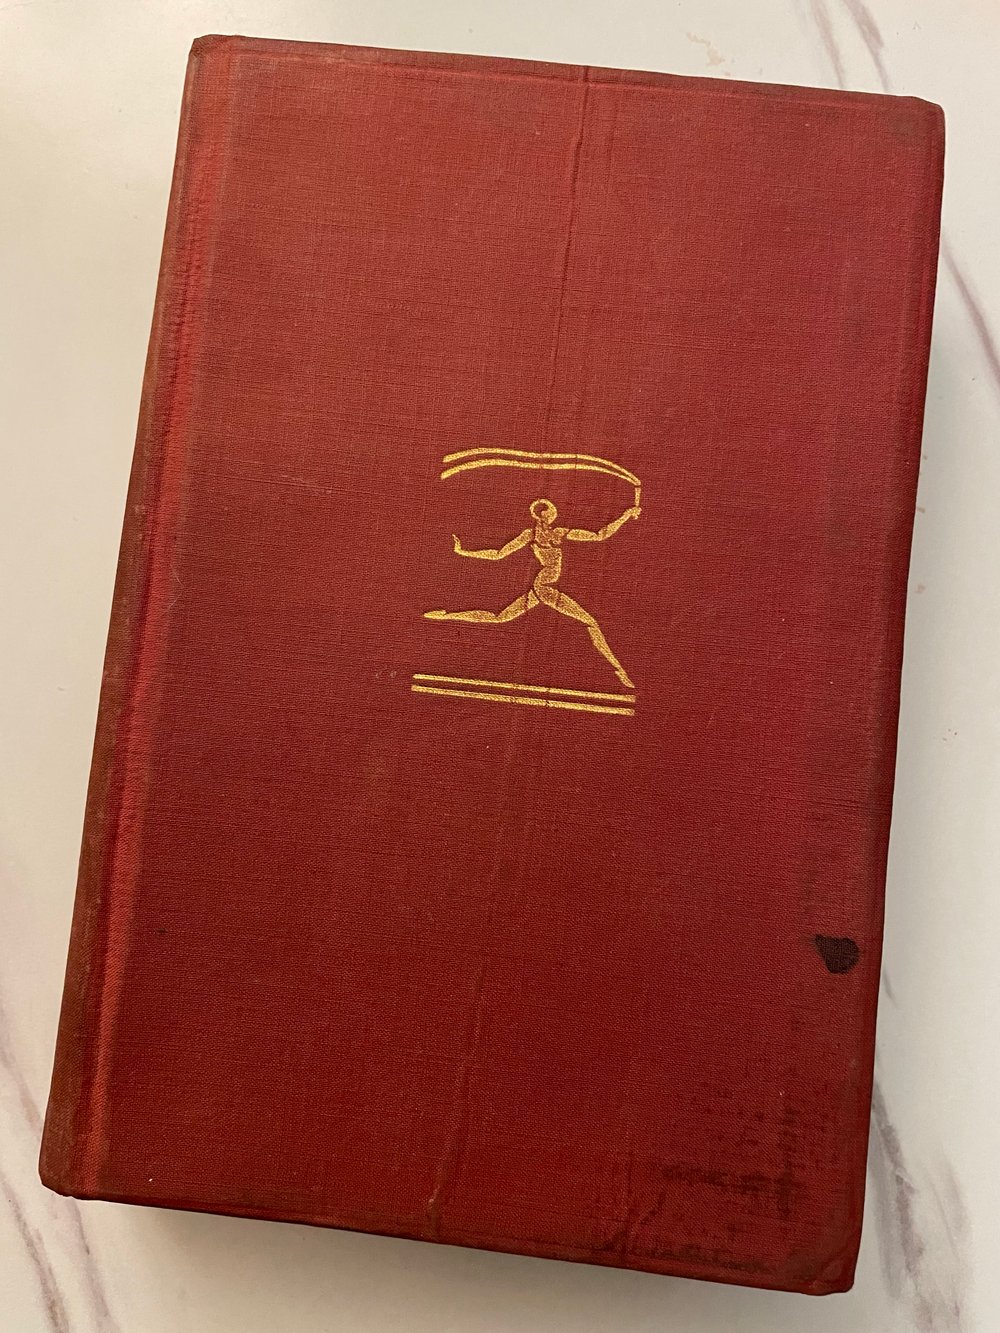 *RARE* Sons and Lovers by D.H. Lawrence (1922 Edition)